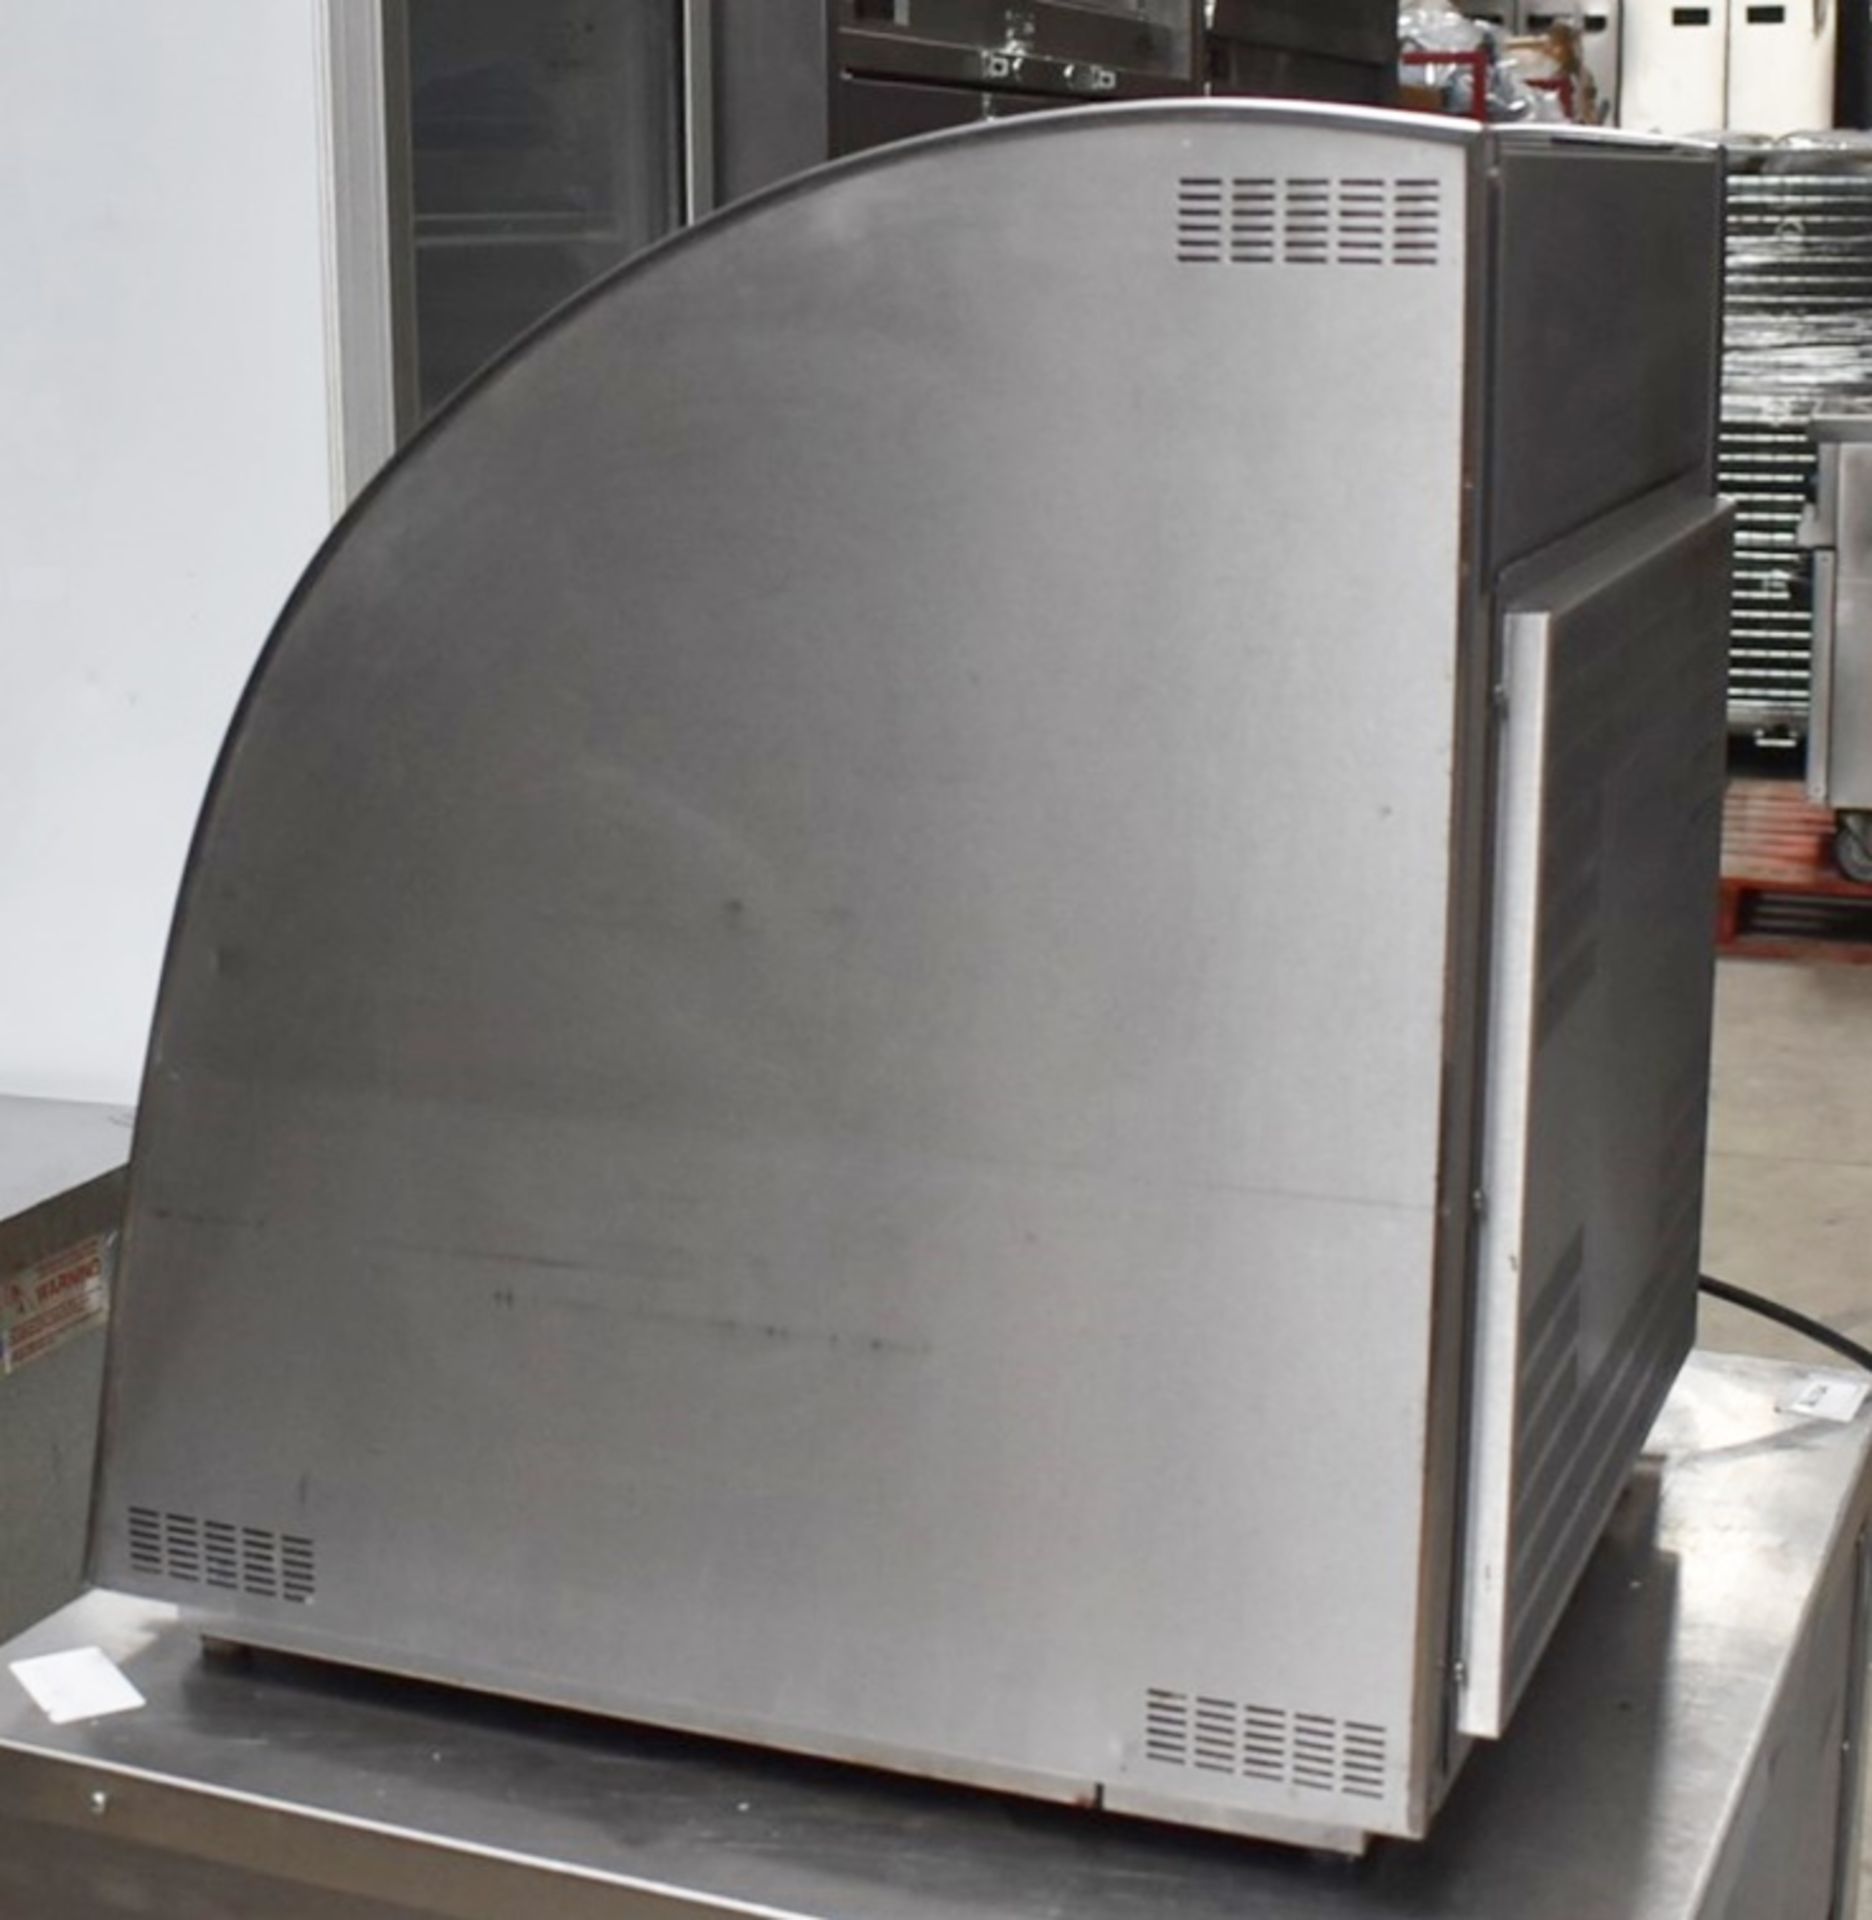 1 x Countertop Oven With Food Warmer Display - Dimensions: H63 x W55 x D56 cms - Recently Removed - Image 11 of 14